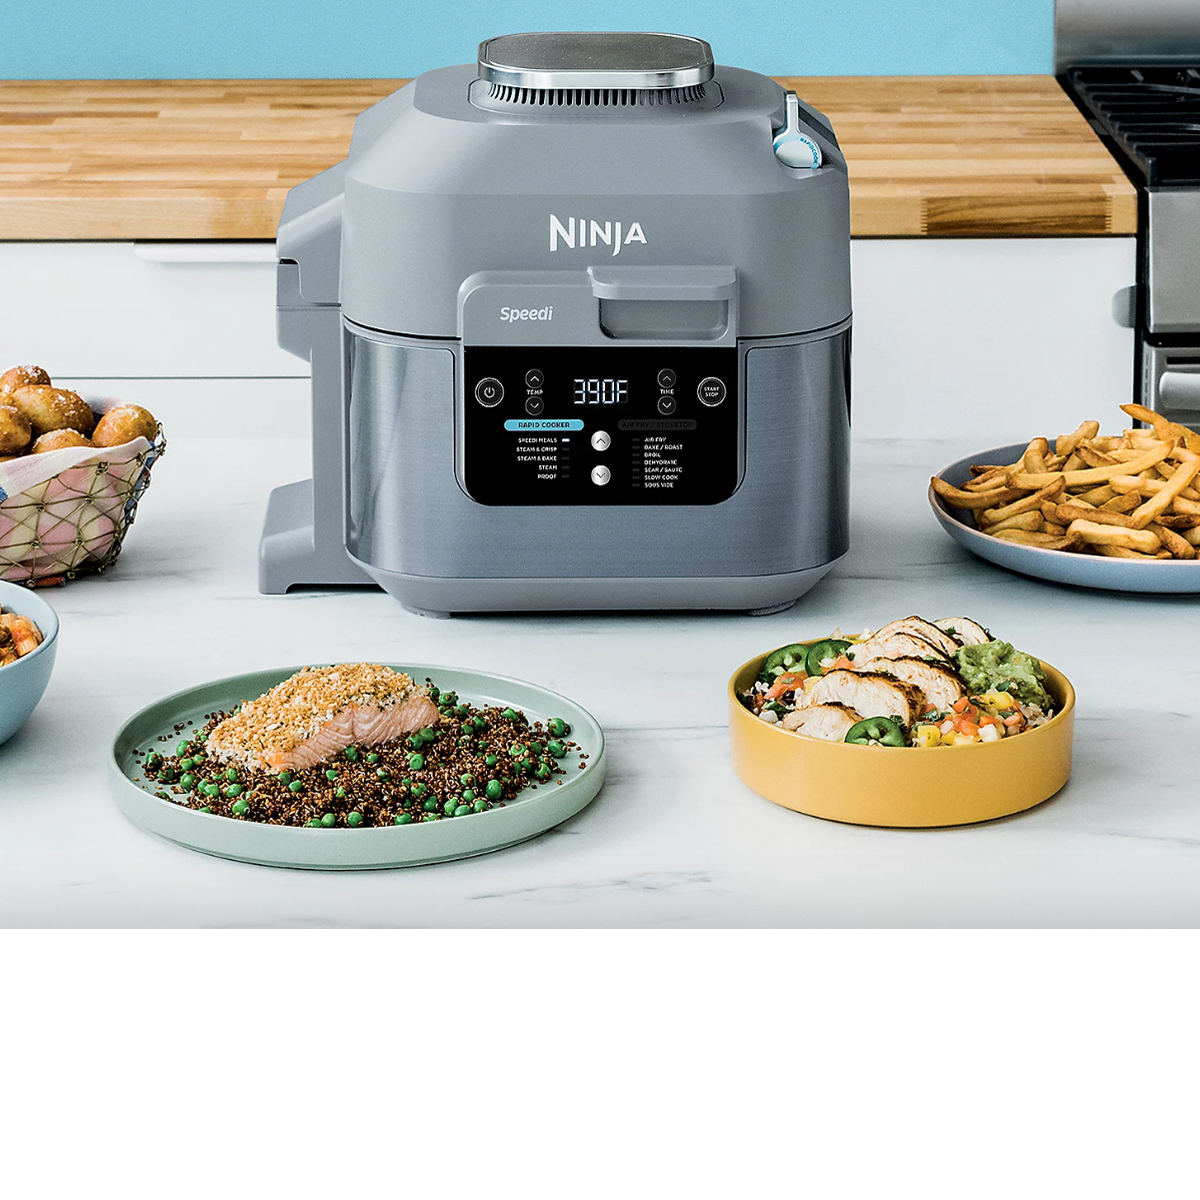 Cook Healthy Meals in Half the Time and Get 53% Off the Ninja Speedi